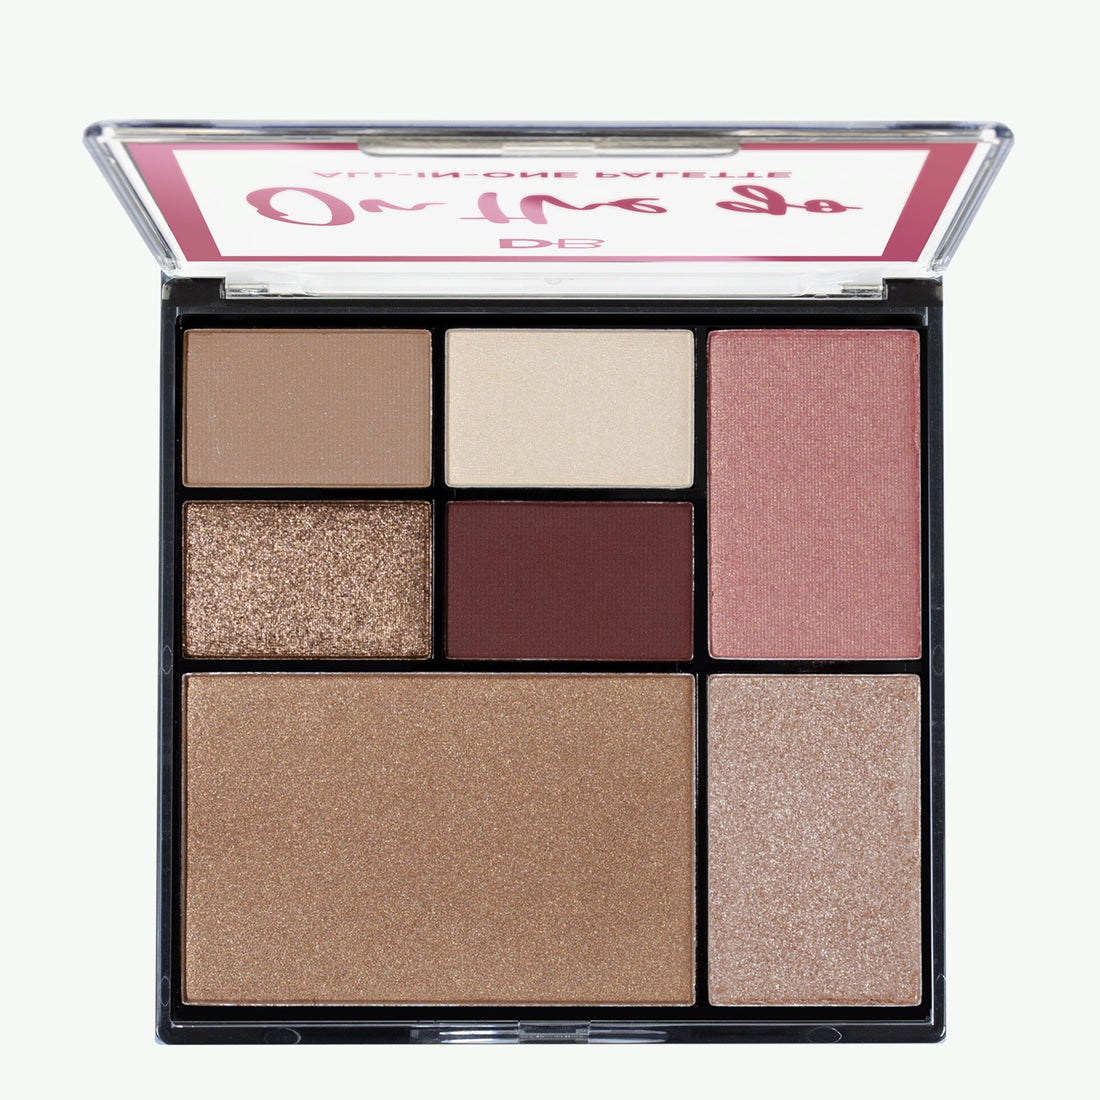 DB On The Go All-in-One Face Palette